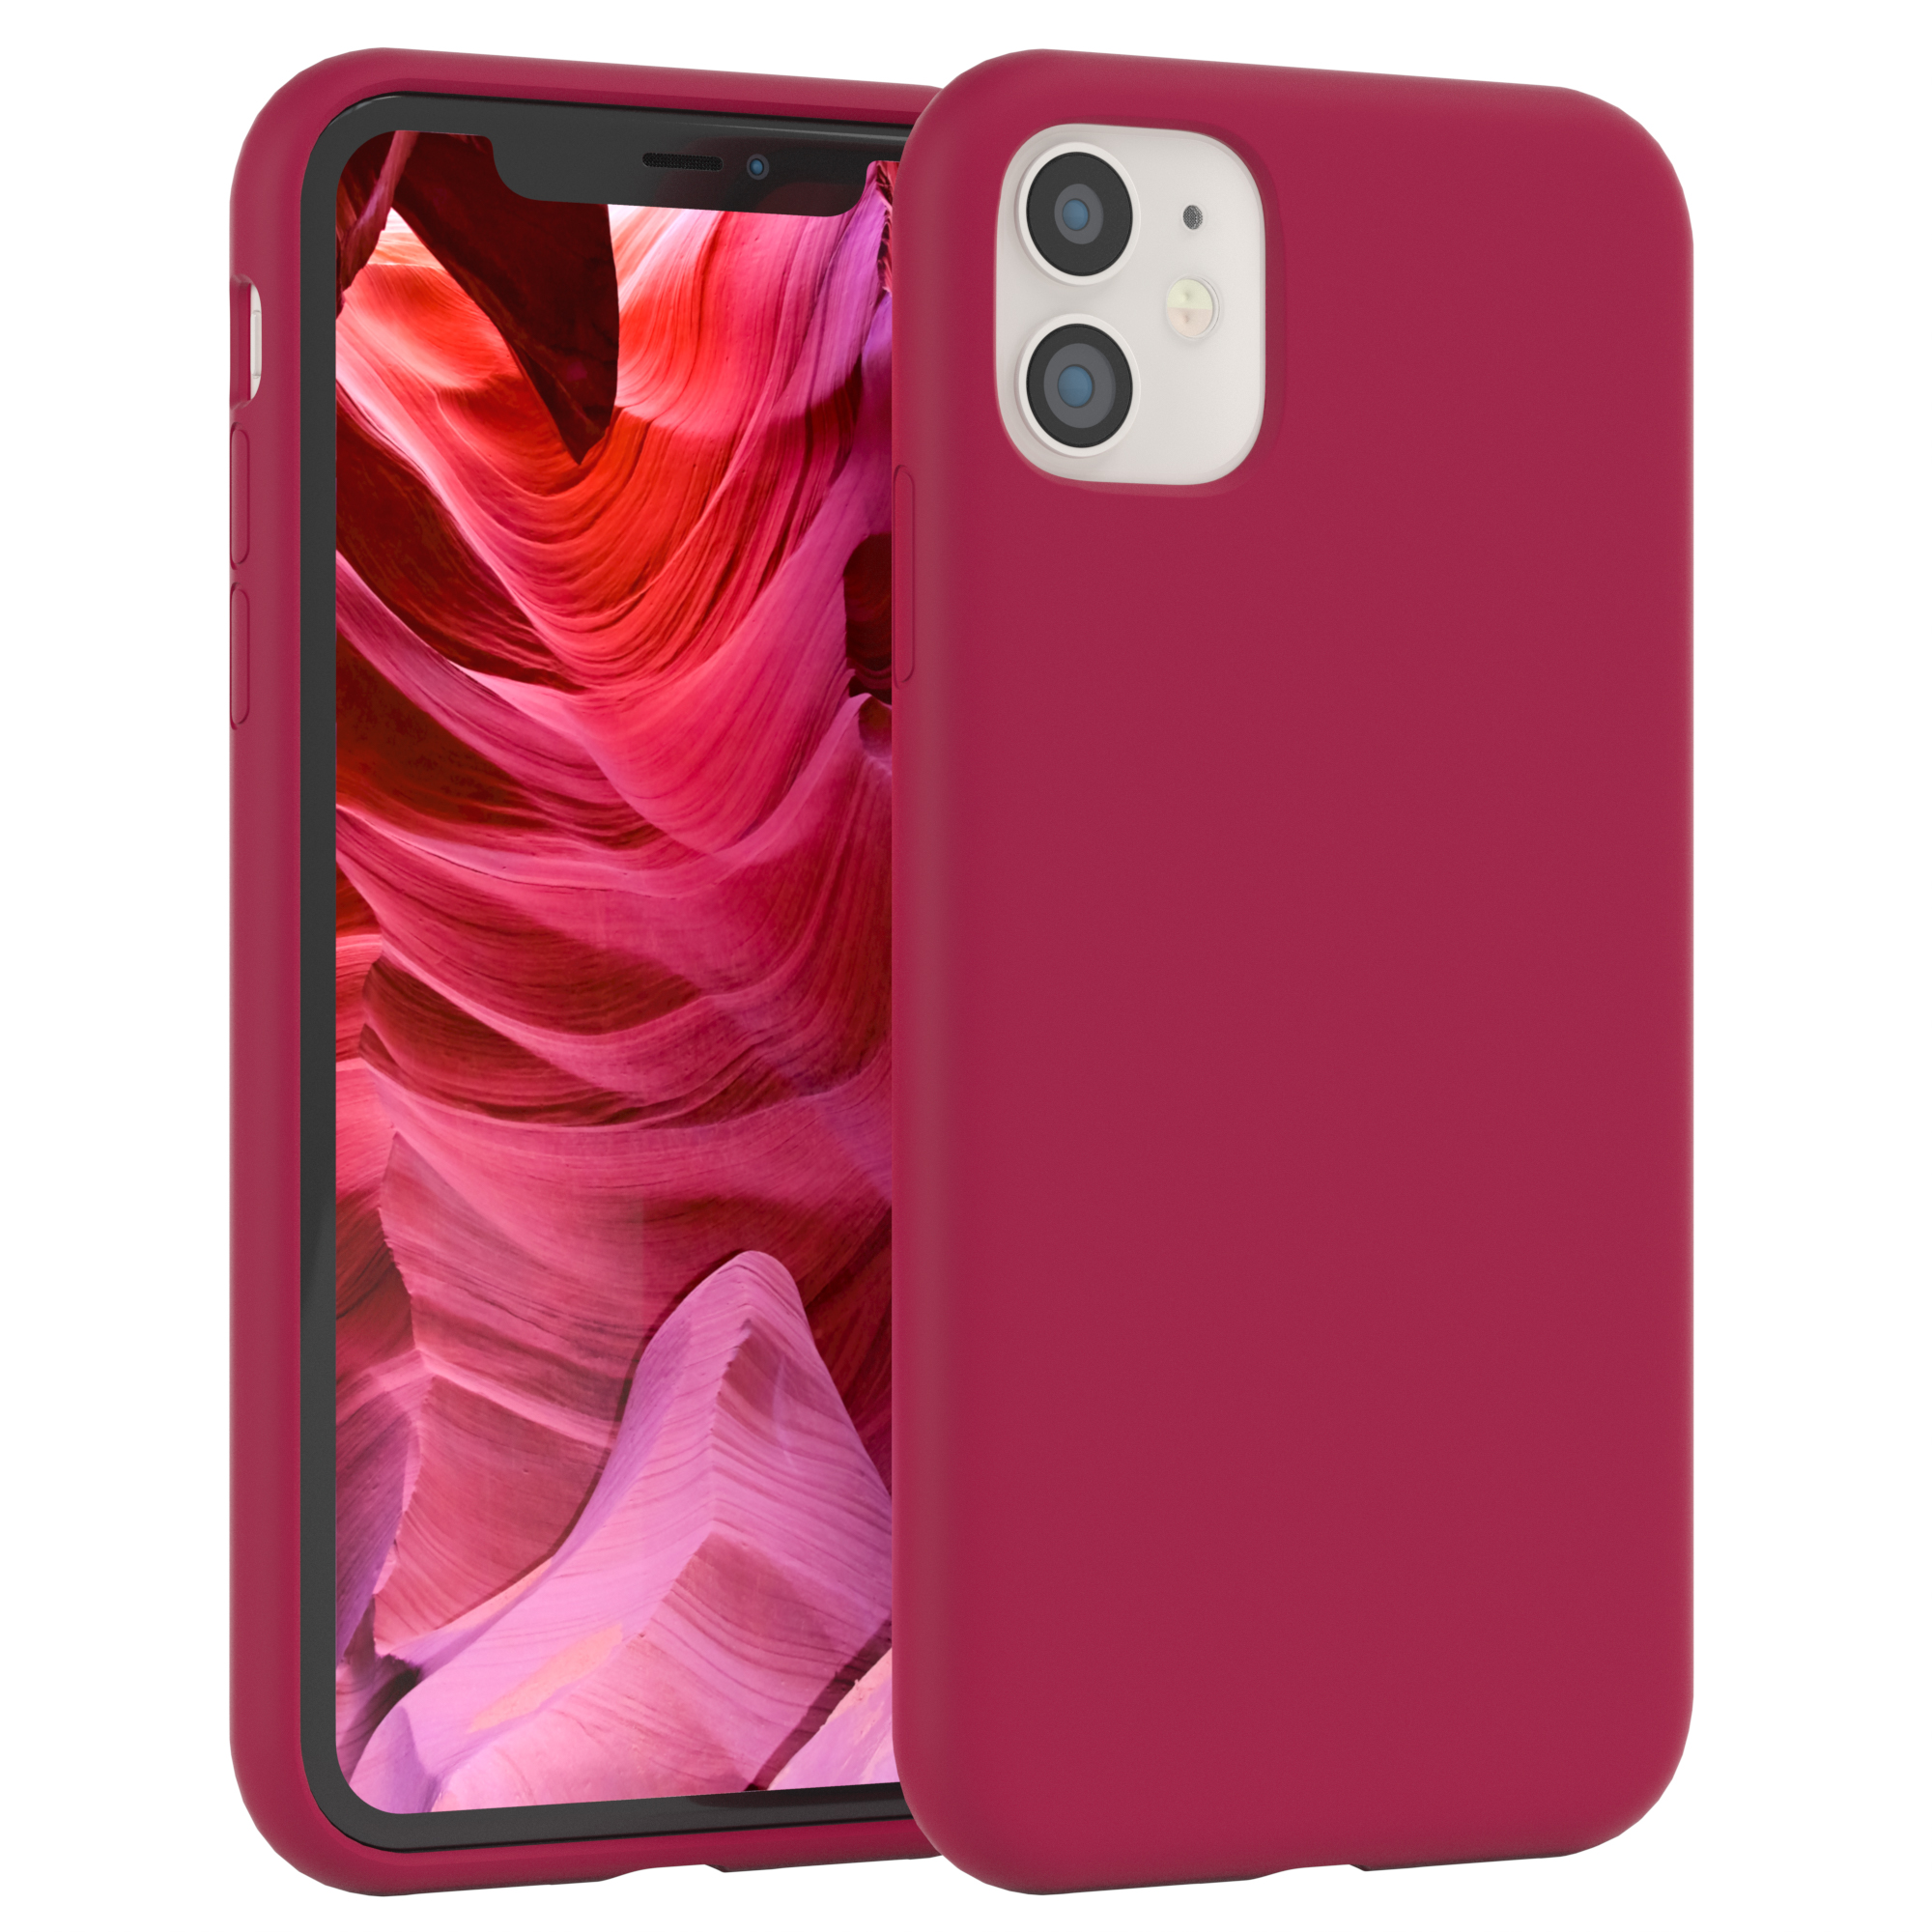 EAZY CASE Premium Silikon Handycase, 11, Beere Rot Apple, / Backcover, iPhone